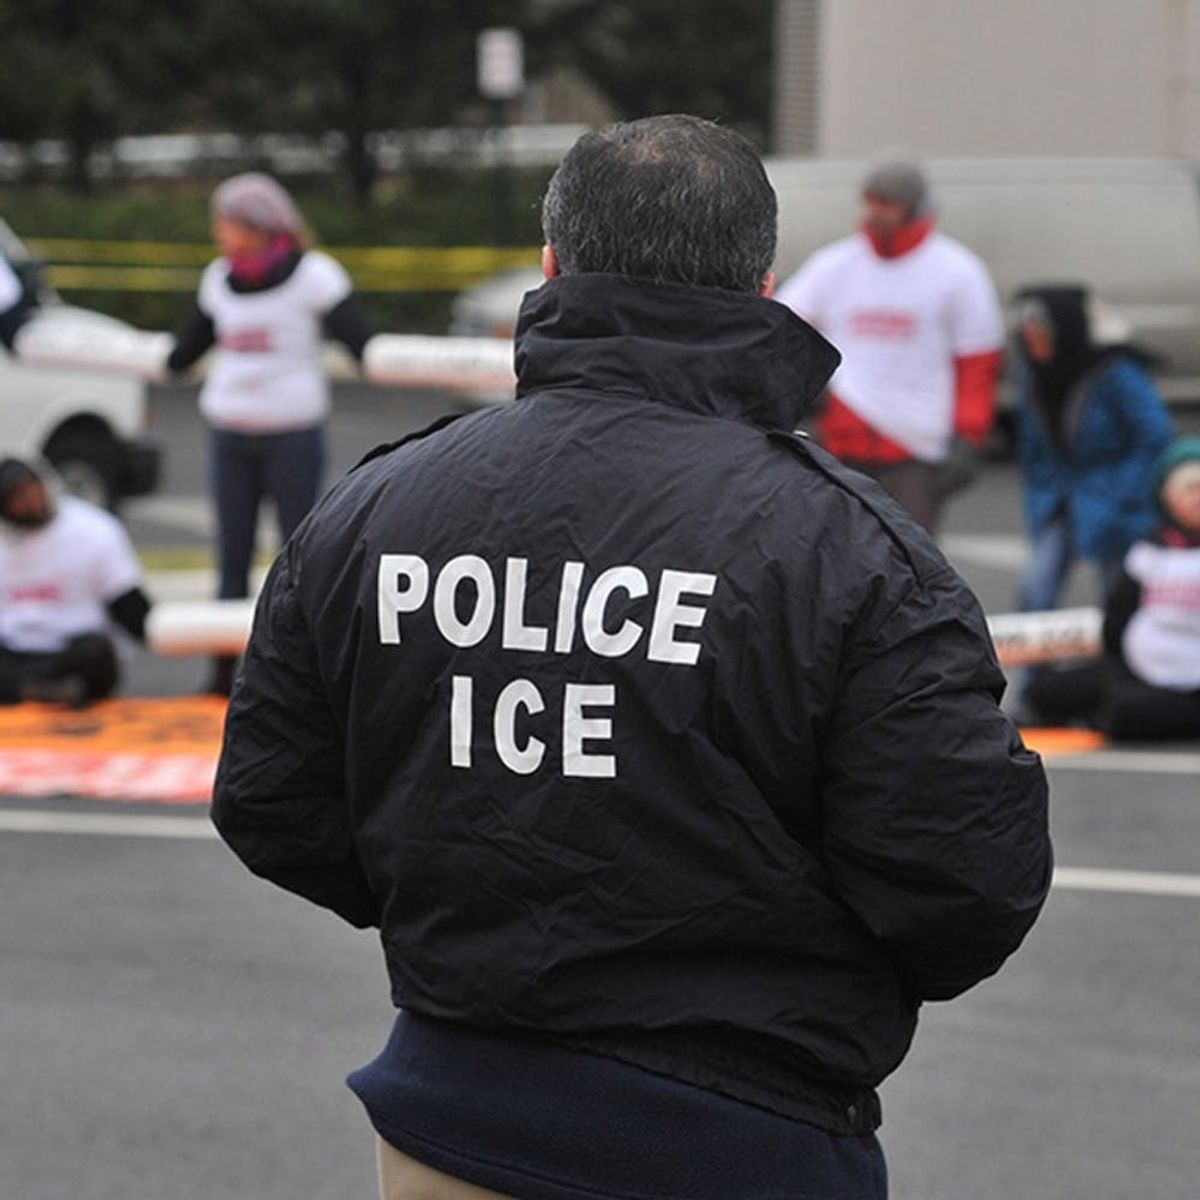 What You Need to Know About the Recent Immigrant Raids